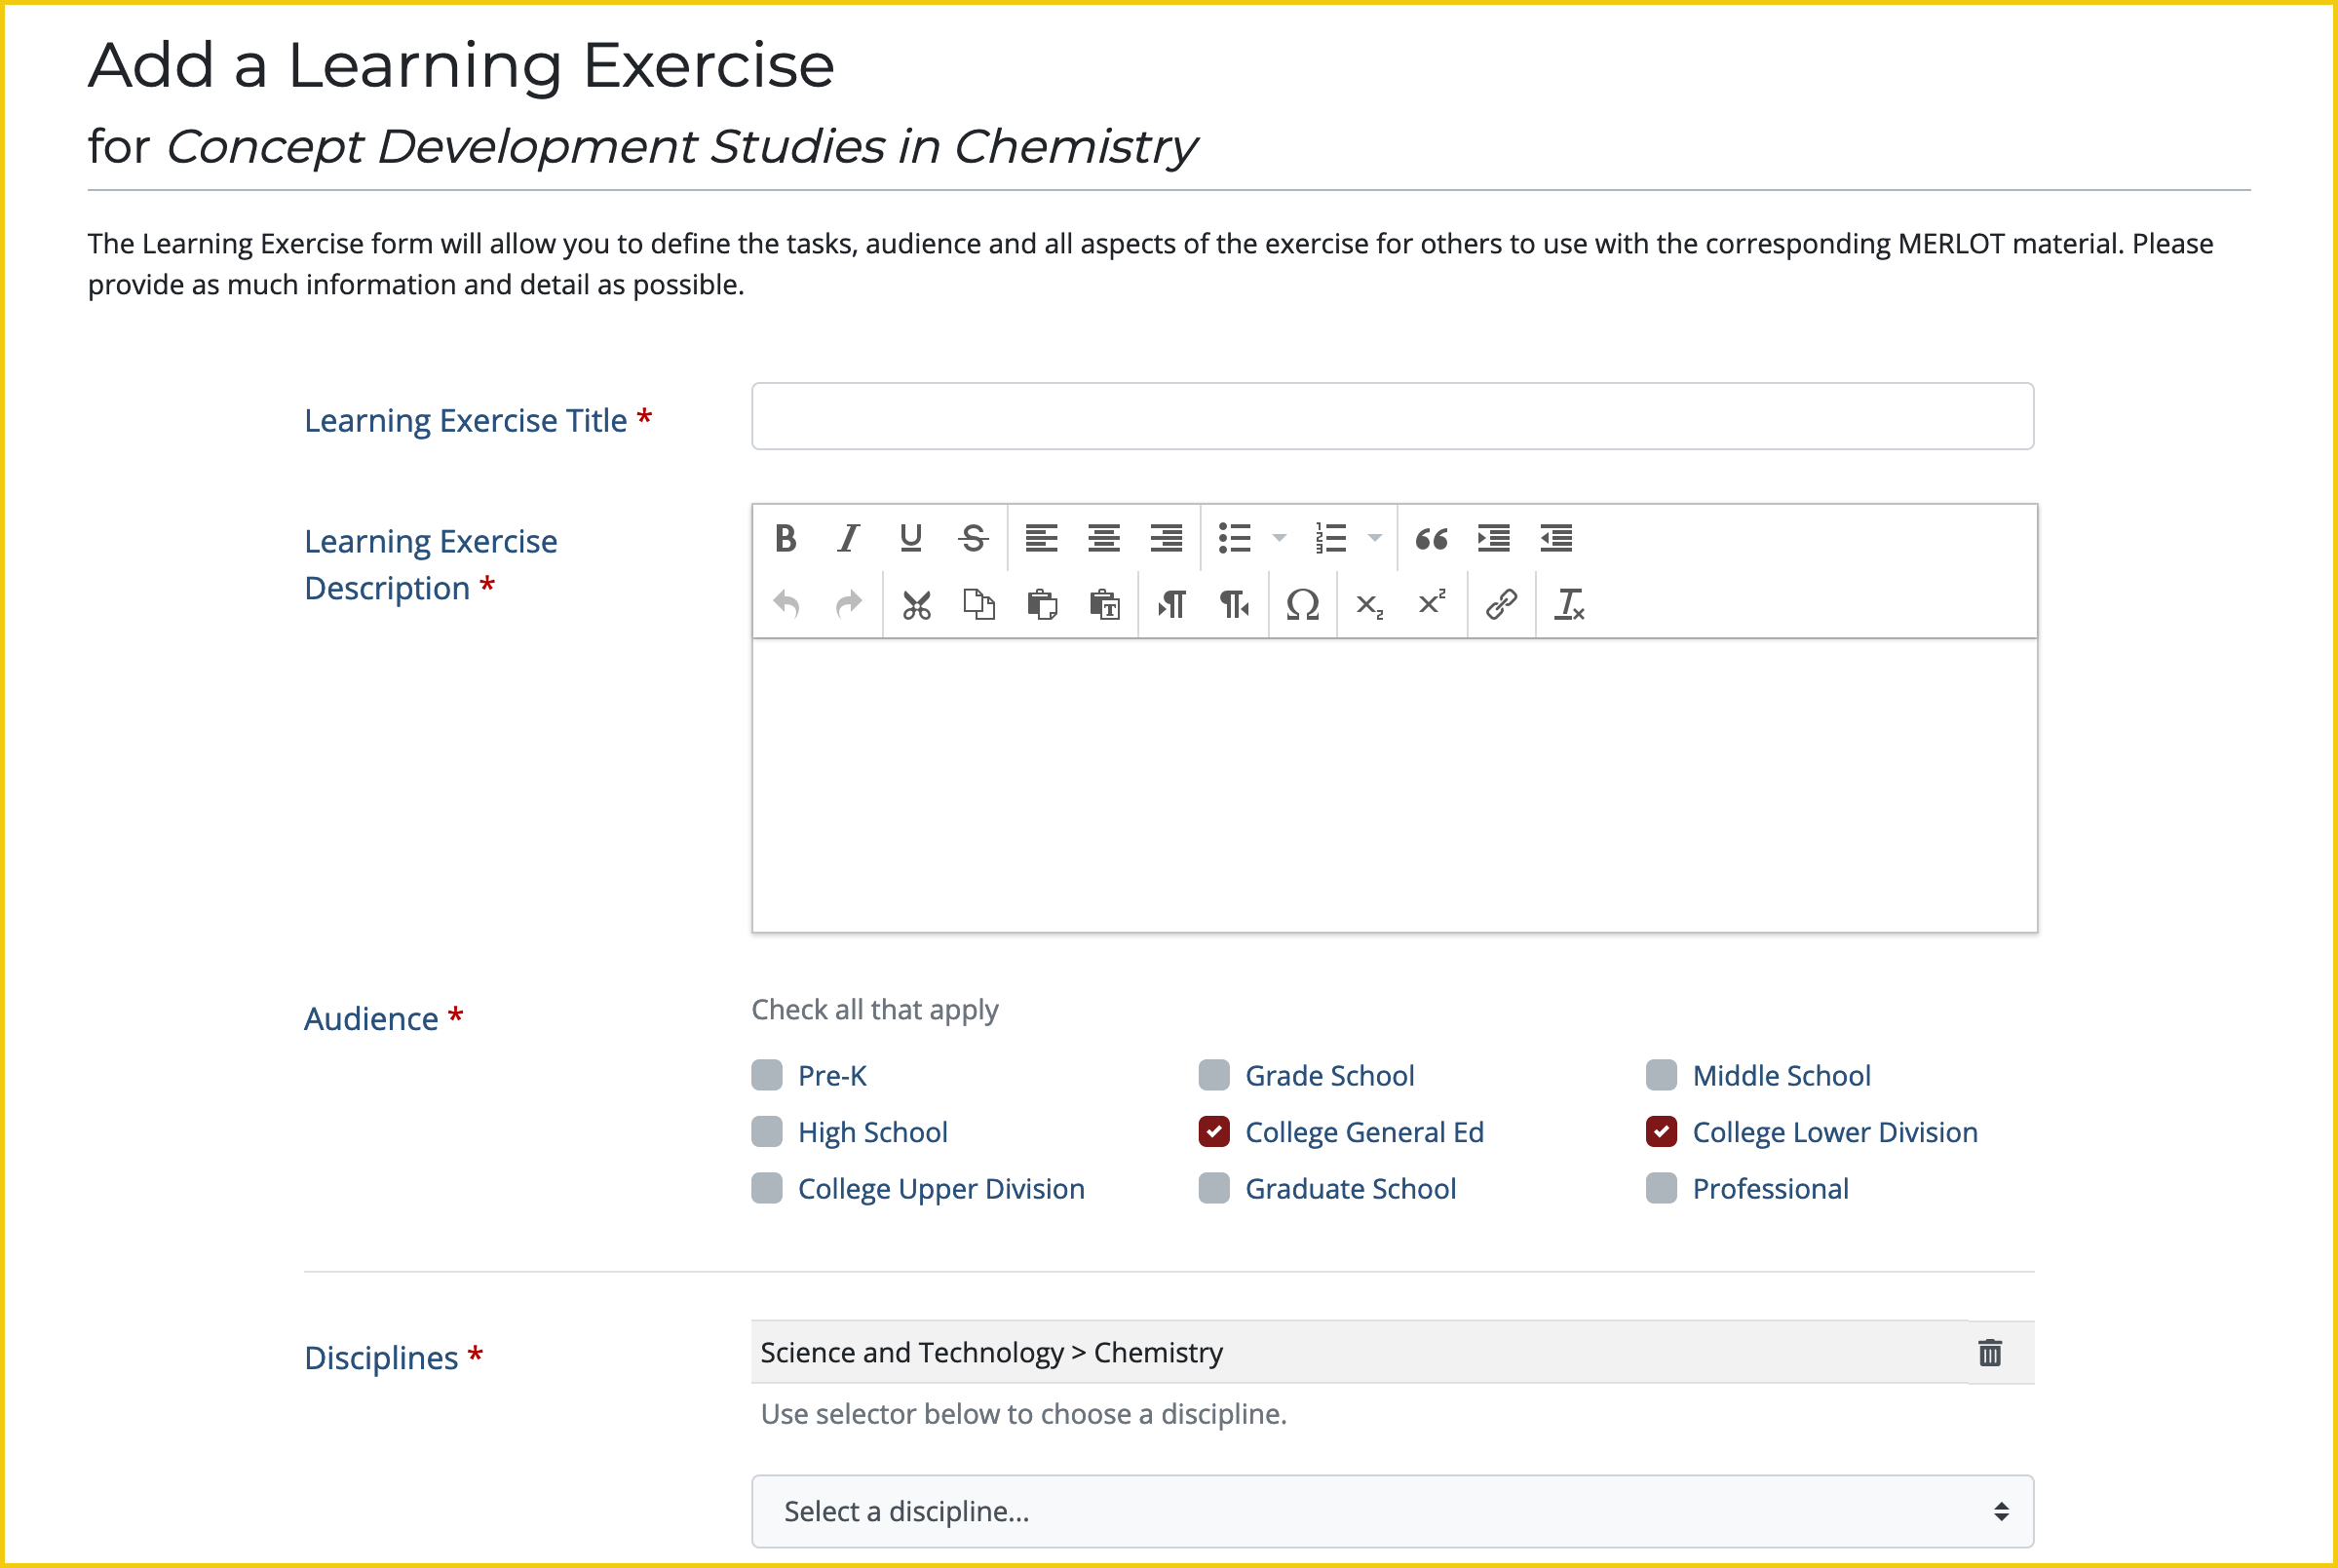 Screenshot from MERLOT showing the "add a  learning exercis" form.